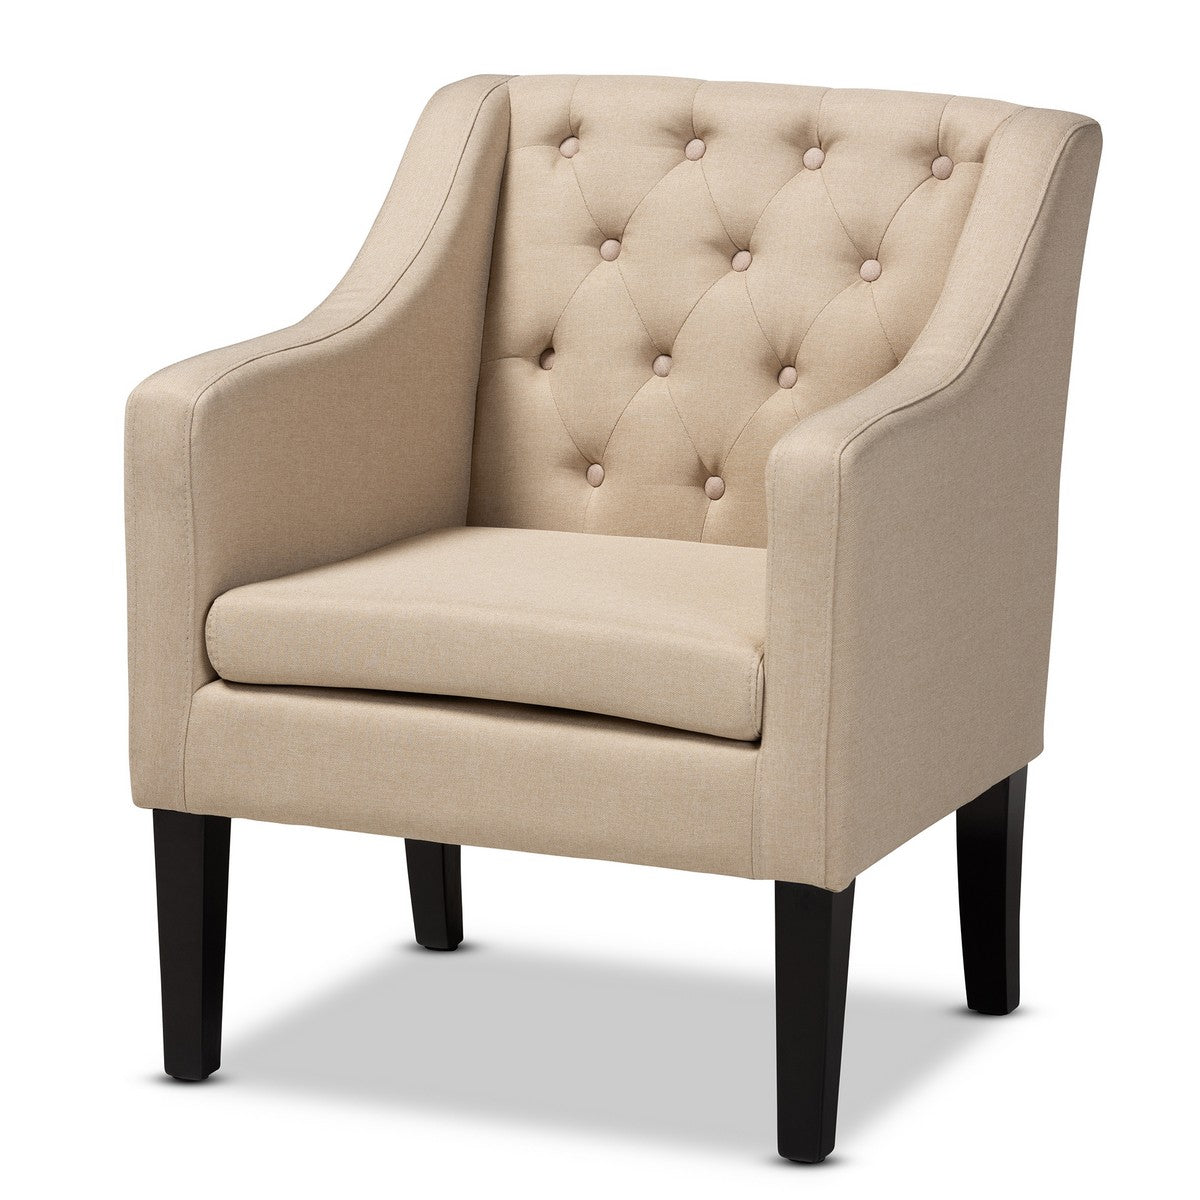 Baxton Studio Brittany Modern and Contemporary Beige Fabric Upholstered Club Chair Baxton Studio-chairs-Minimal And Modern - 1